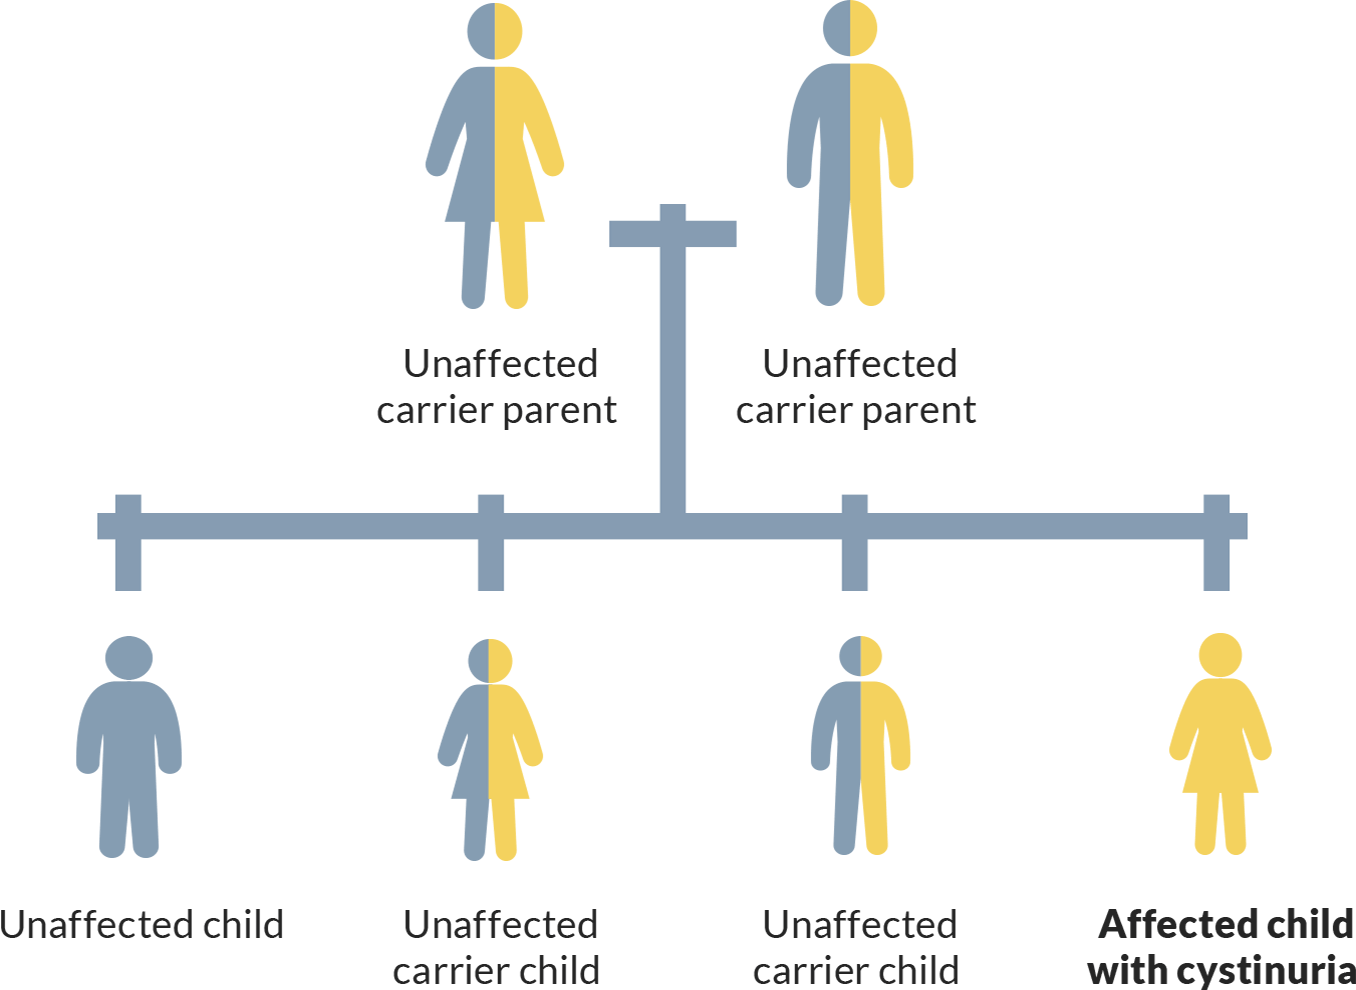 Picture showing how a person with cystinuria inherited 2 abnormal genes—1 from each parent.